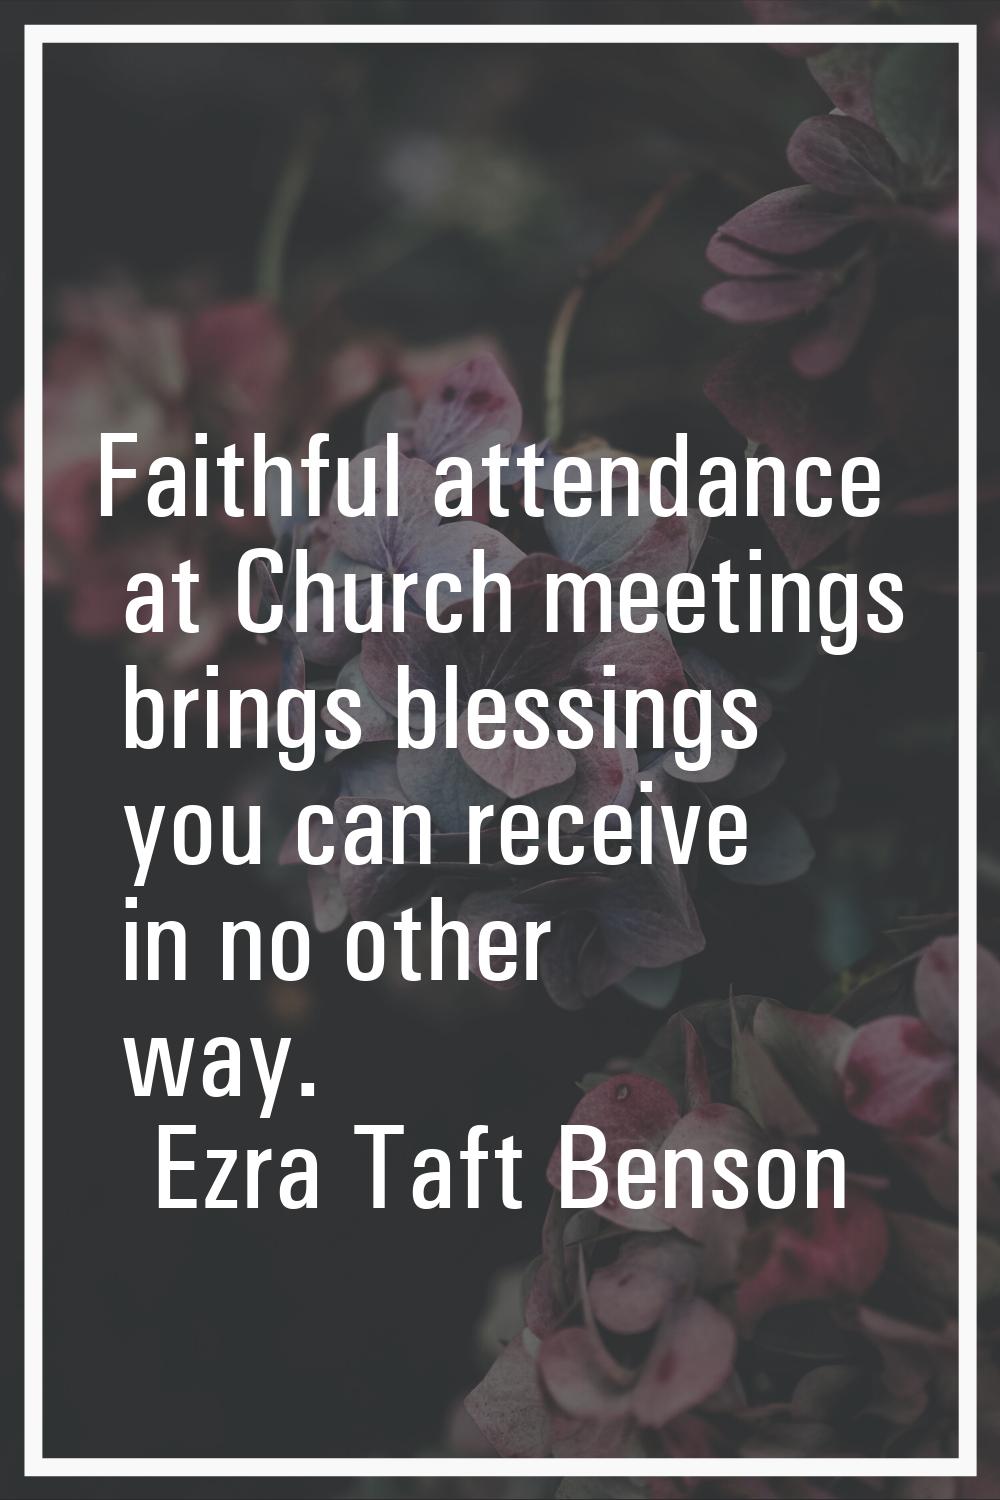 Faithful attendance at Church meetings brings blessings you can receive in no other way.